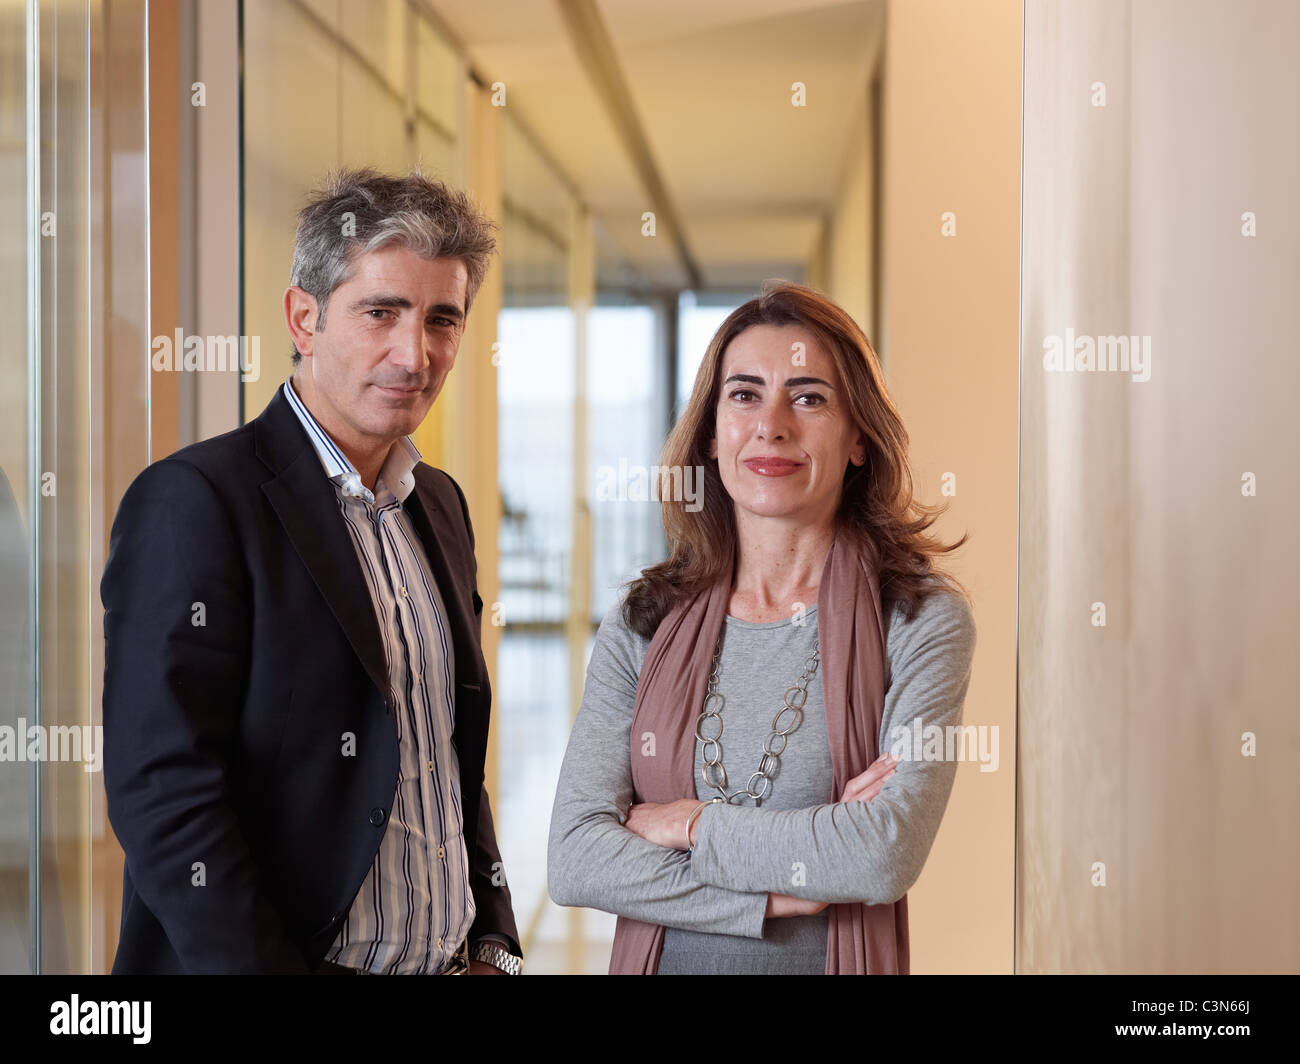 Portrait of two individuals Stock Photo